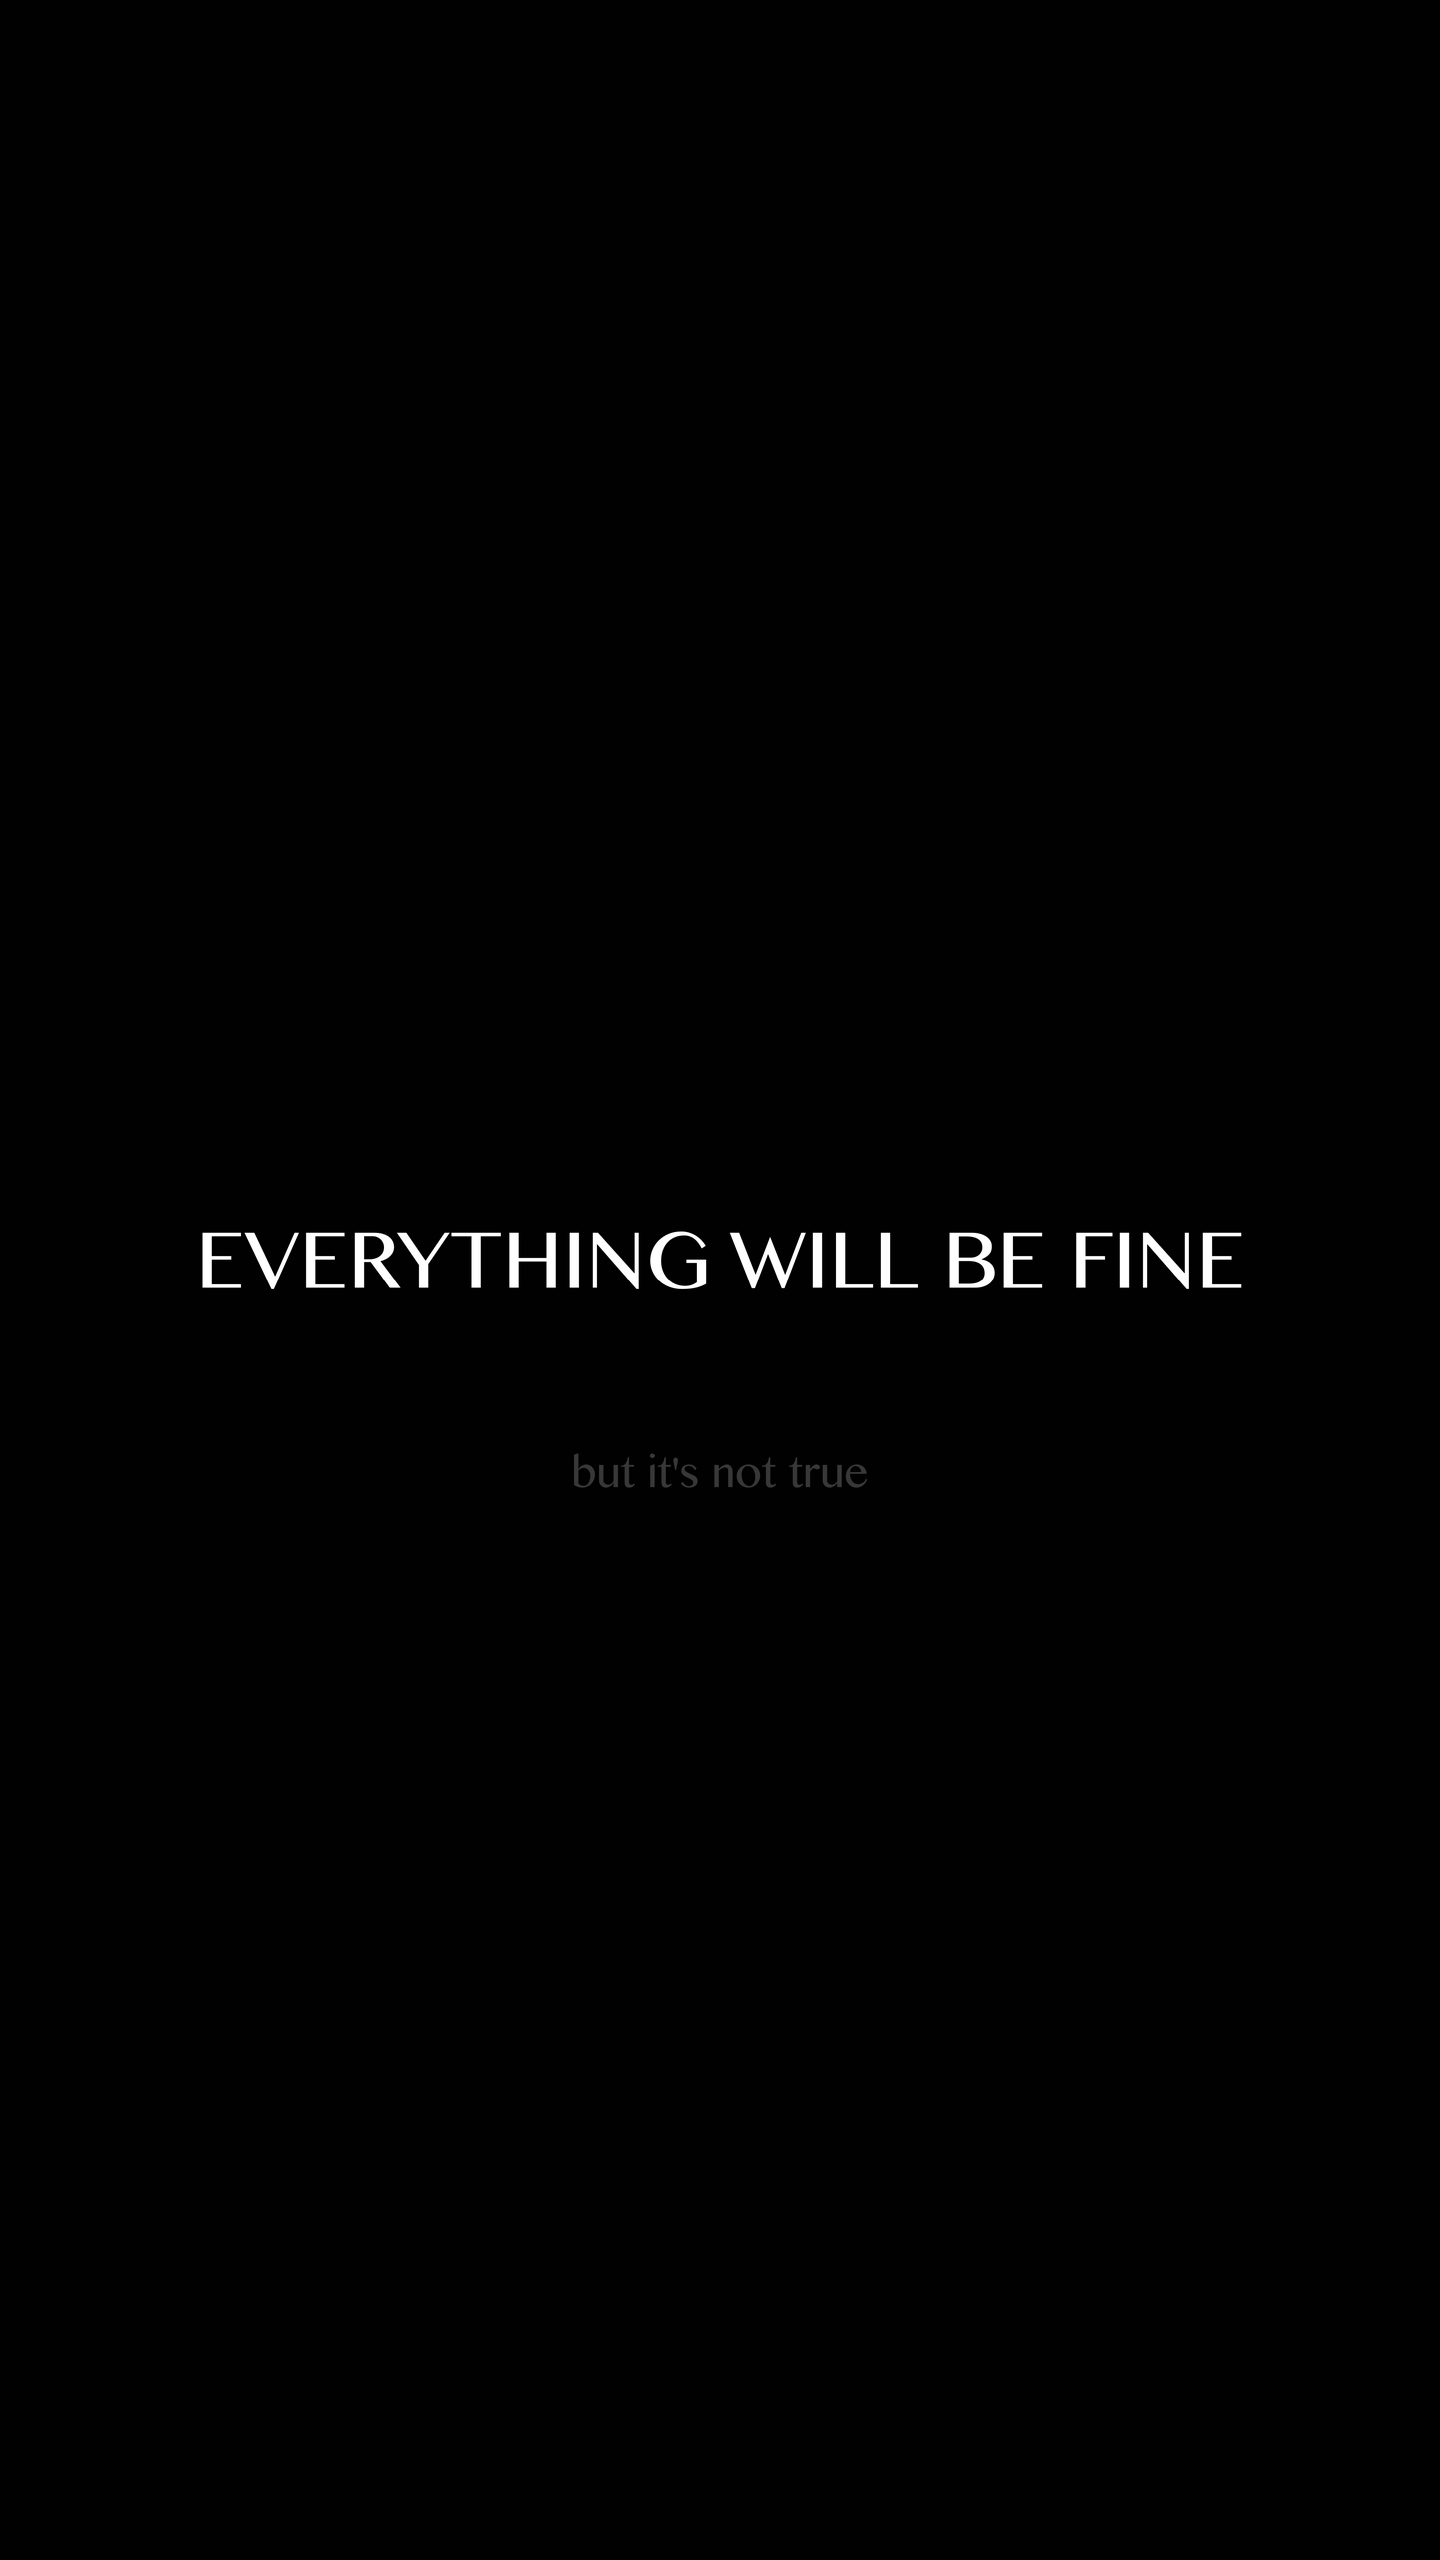 Everything will be fine Wallpaper Download